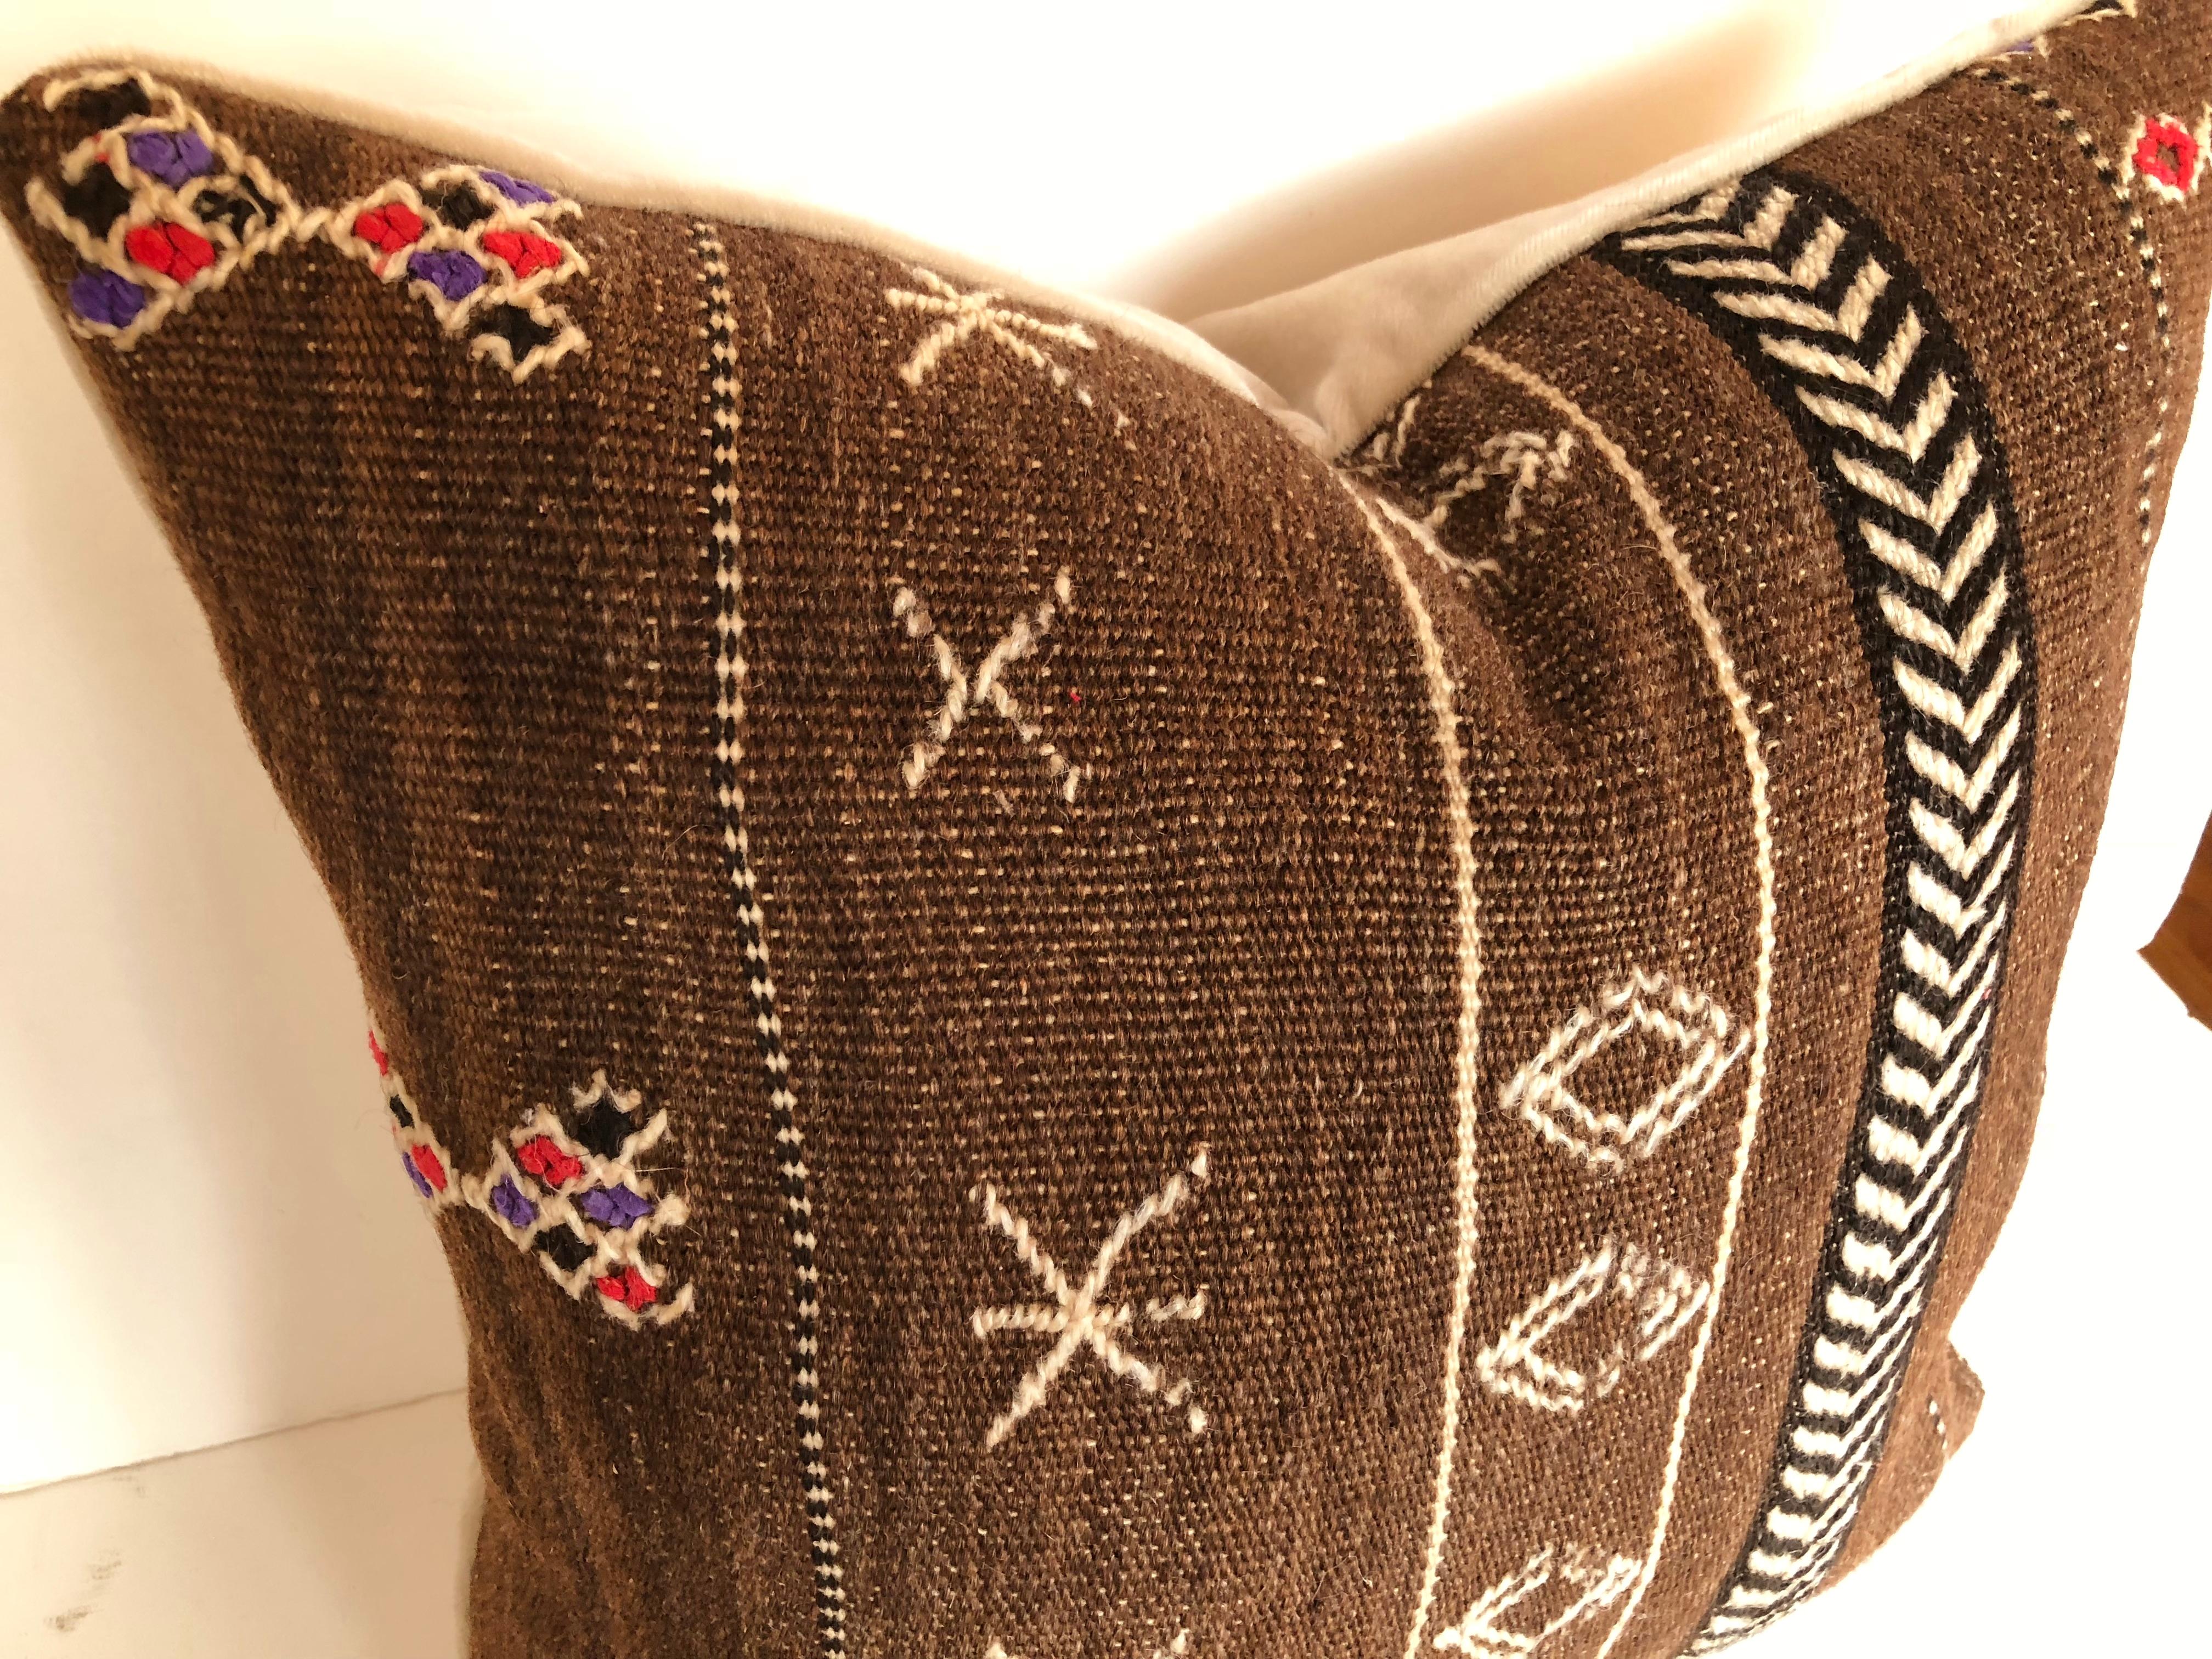 Custom Pillows by Maison Suzanne Cut from a Vintage Wool Moroccan Ourika Rug In Good Condition For Sale In Glen Ellyn, IL